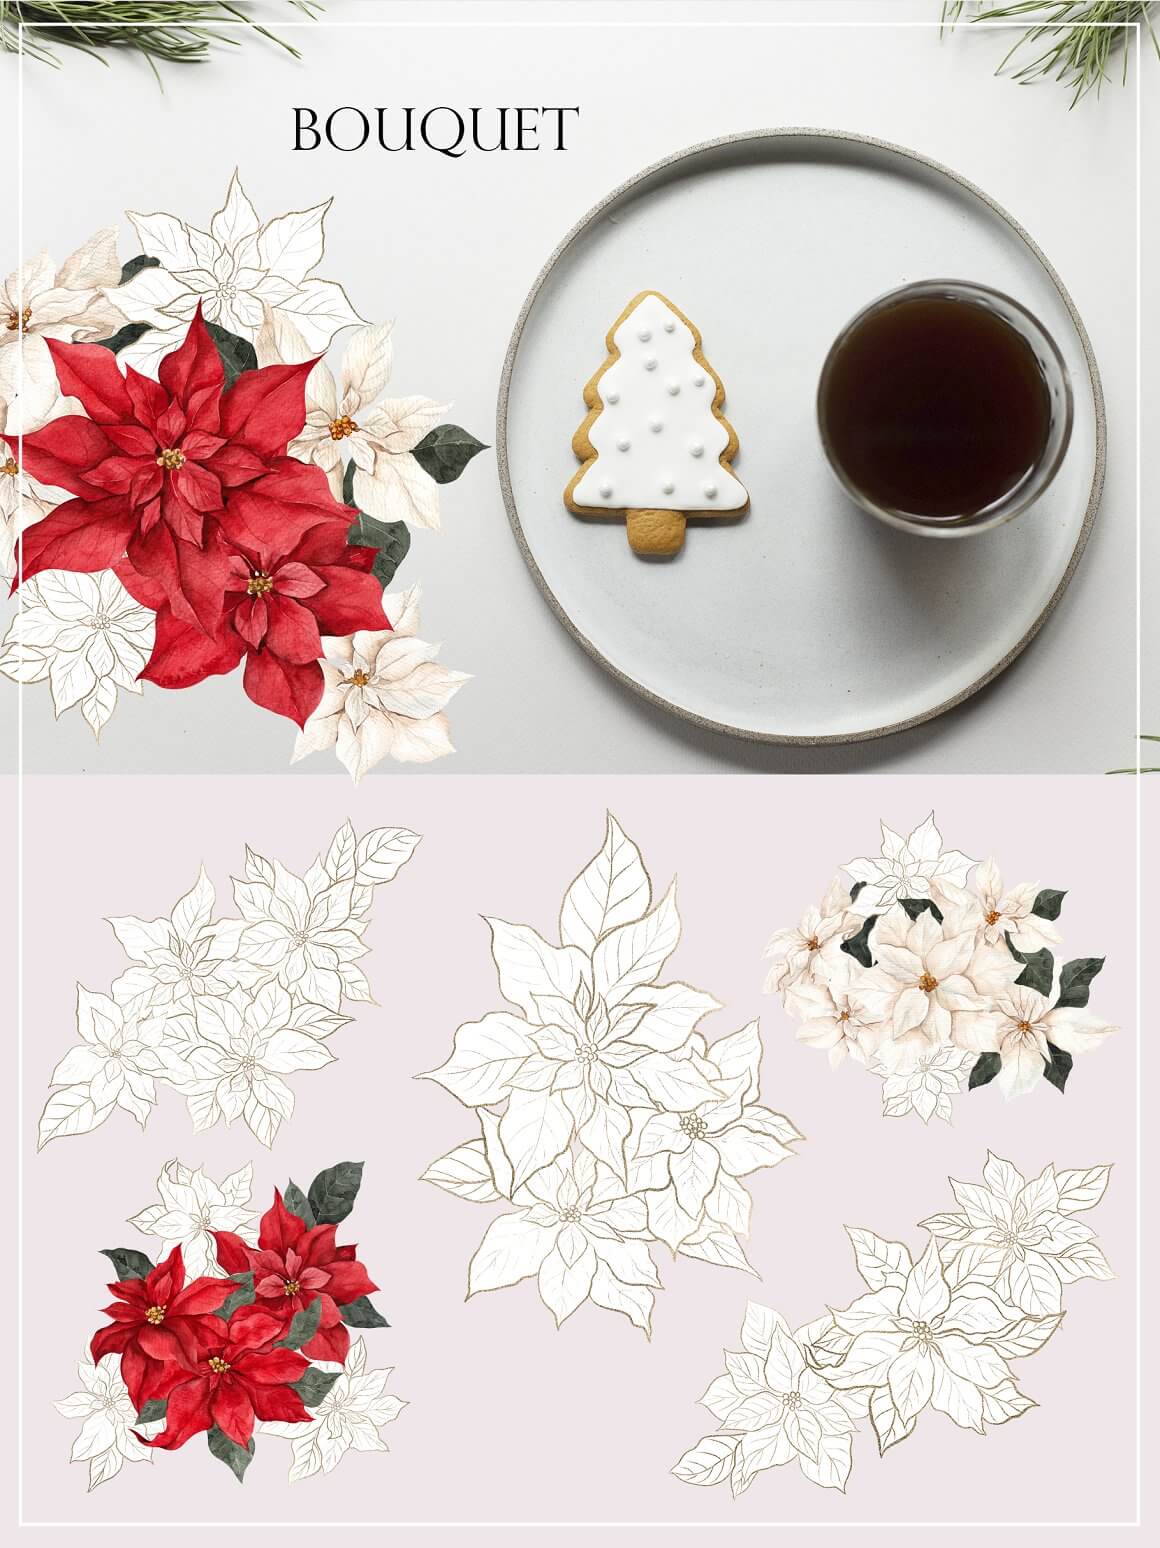 Christmas cookies and warm coffee, and next to them a bouquet of poinsettias.